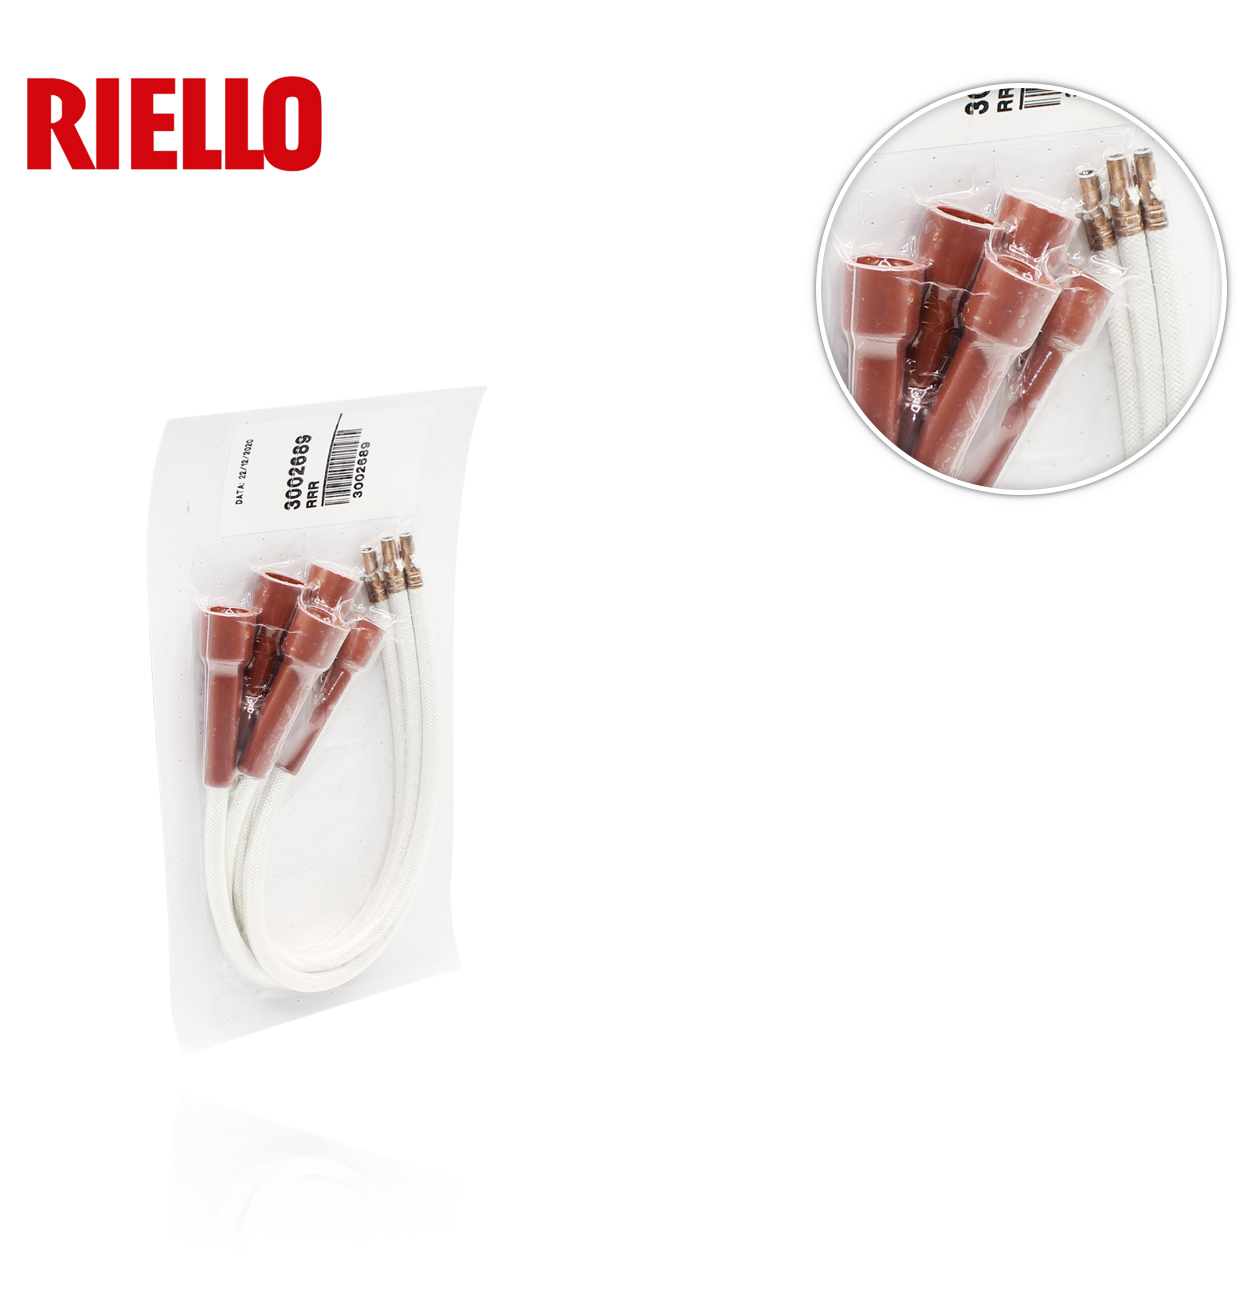 KIT CABLES (5uds.)  RIELLO 3002689